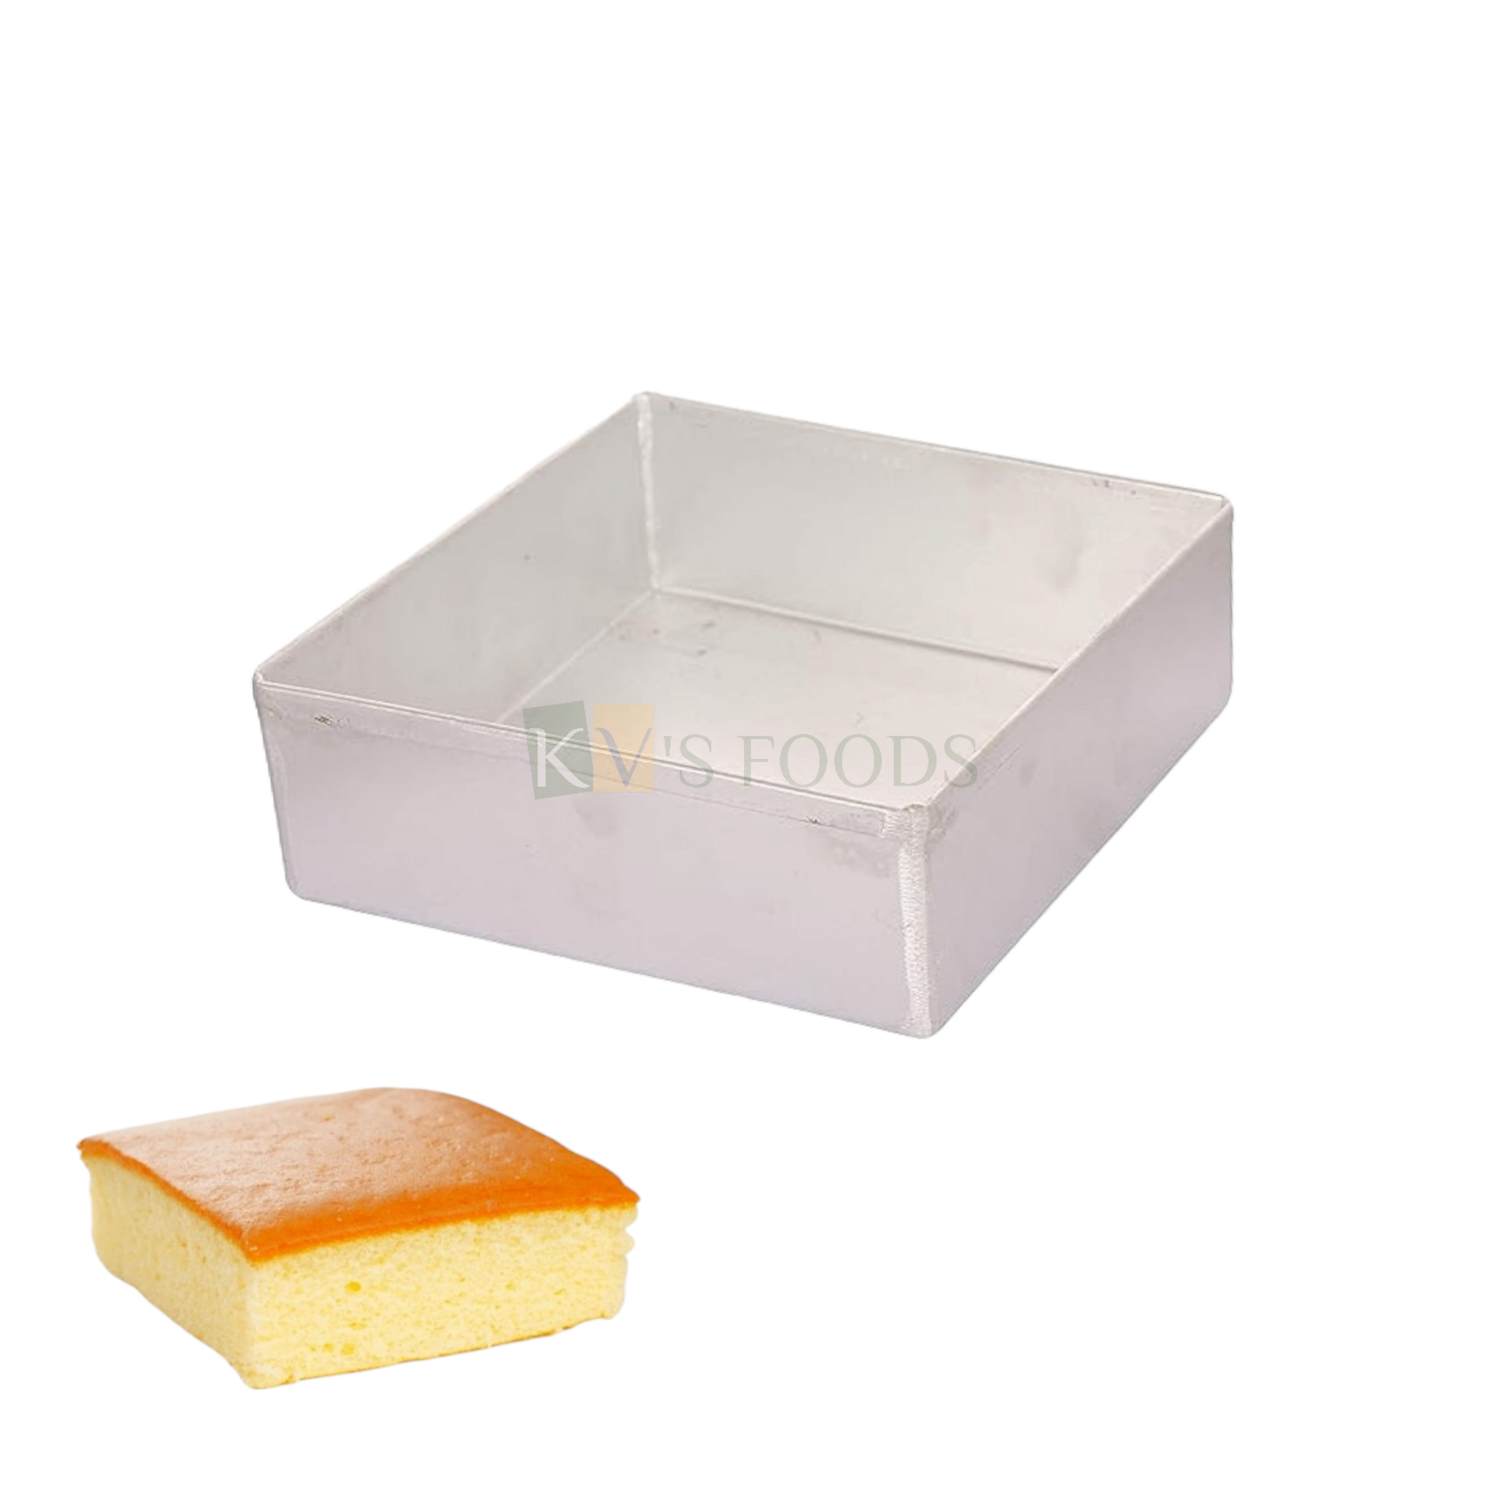 1PC Size 7 x 7 x 2 Inch Capacity ~ 600 Grams Aluminium Baking Pan Silver Square Medium Loaf Bread Cake Mould Bakeware Mousse Pudding Cheese Friut Chocolate Cakes Containers Mold Tins Tray for Ovens